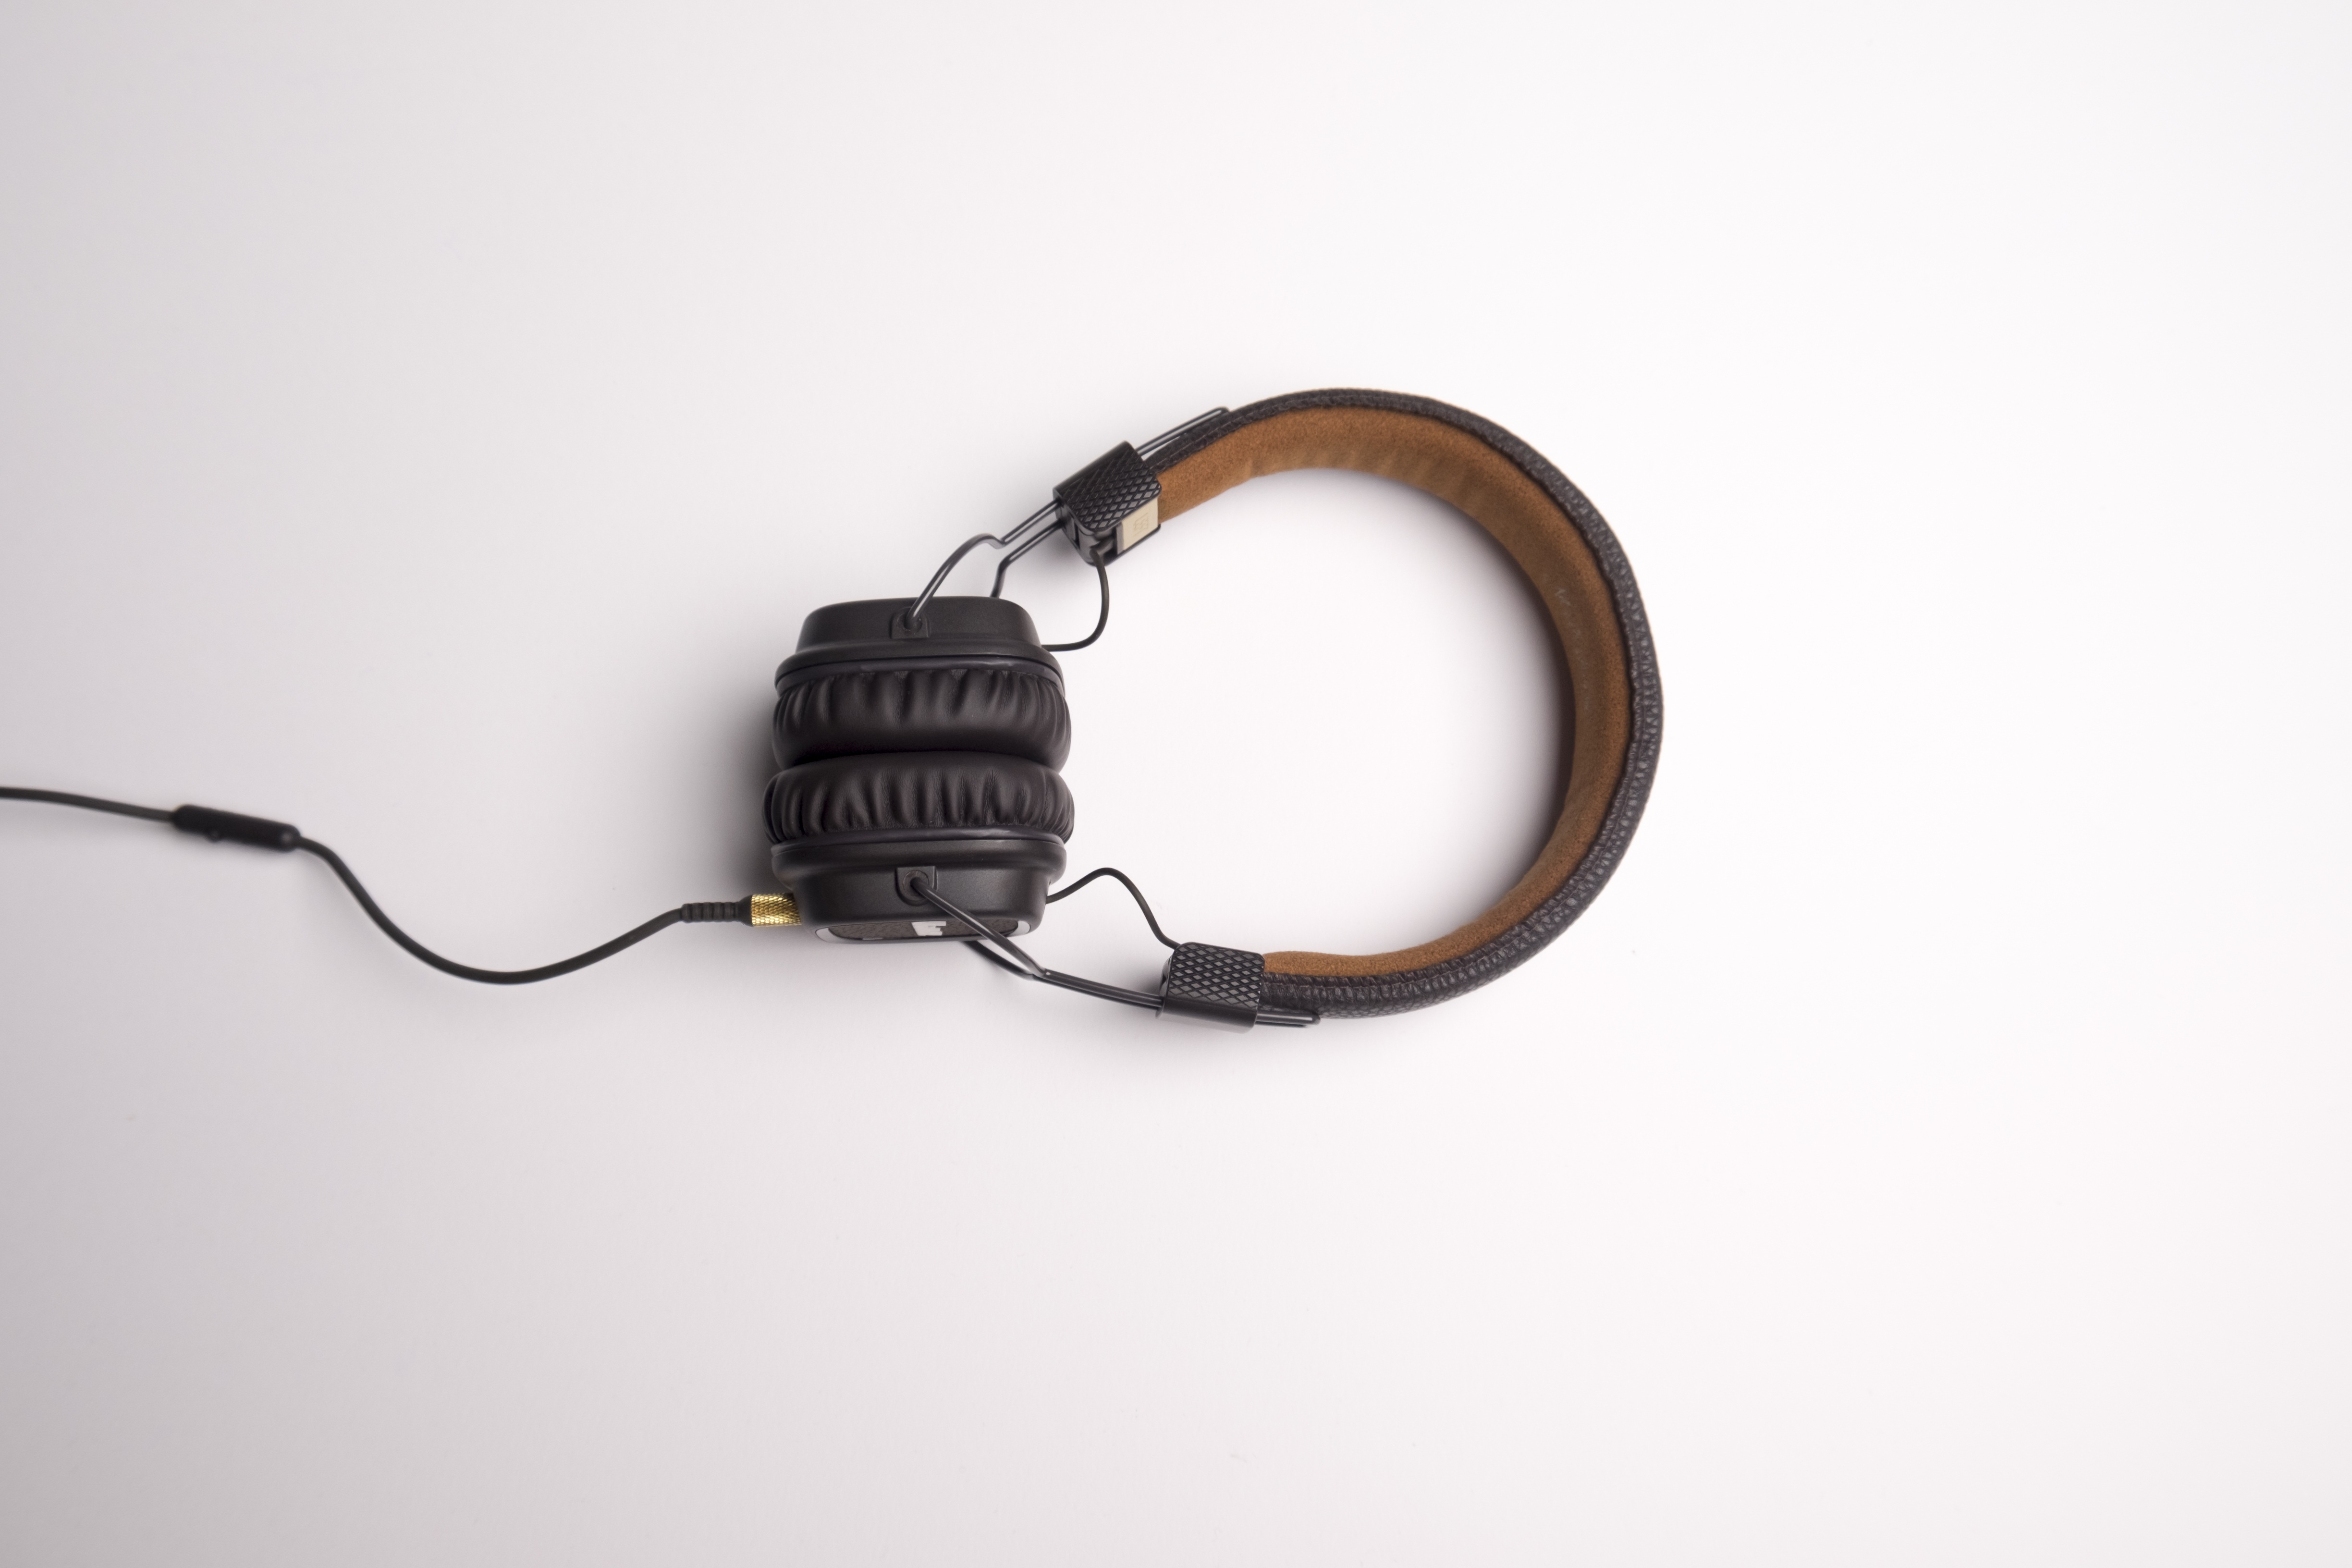 Free photo Headphones on a white background